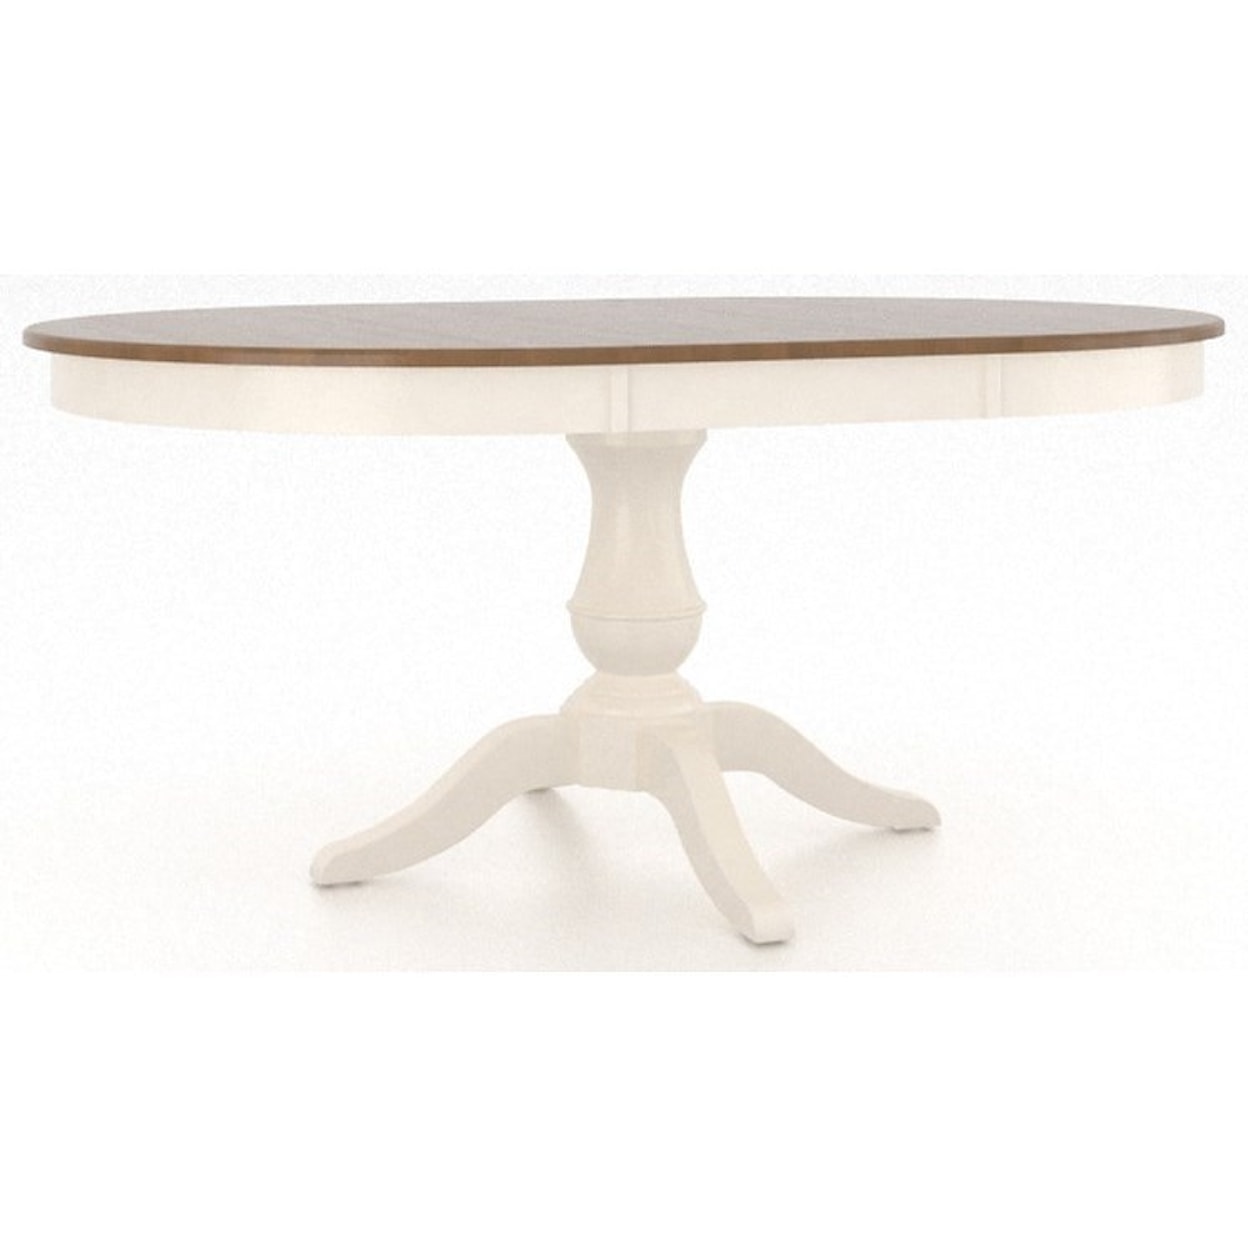 Canadel Gourmet Customizable Round Pedestal Table with Leaf